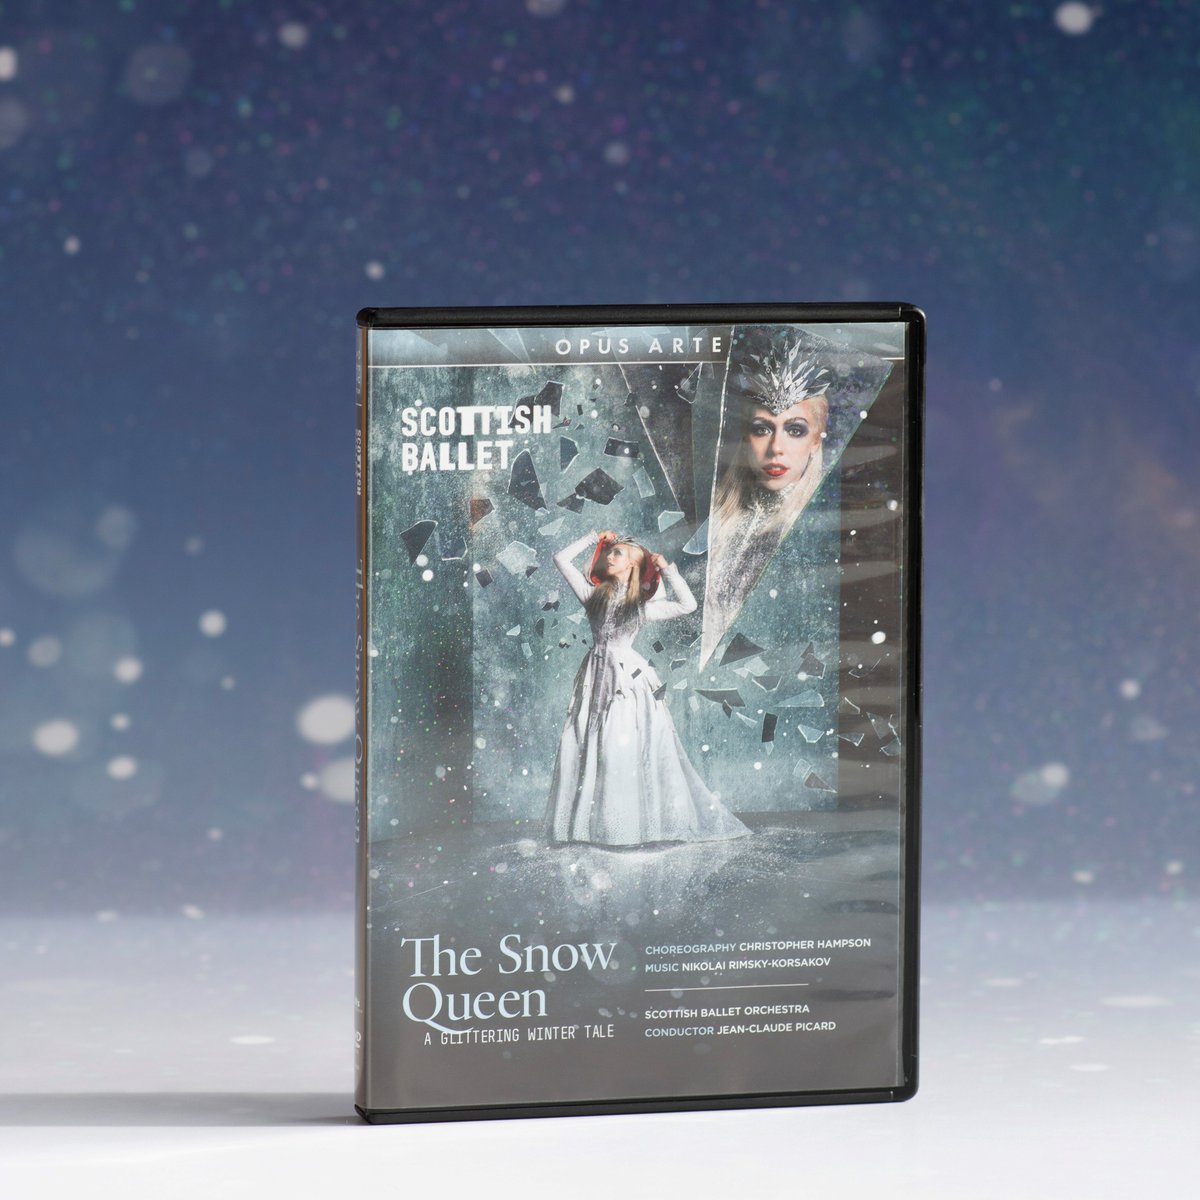 Did you enjoy The Snow Queen in theatres? Now you can celebrate our much loved production of @HampsonChris' #SBSnowQueen at home too! Captured at Festival Theatre, Edinburgh in Dec 2019, you can watch our filmed production on DVD and Blu-ray: bit.ly/3WzPqRY 🎥🎞